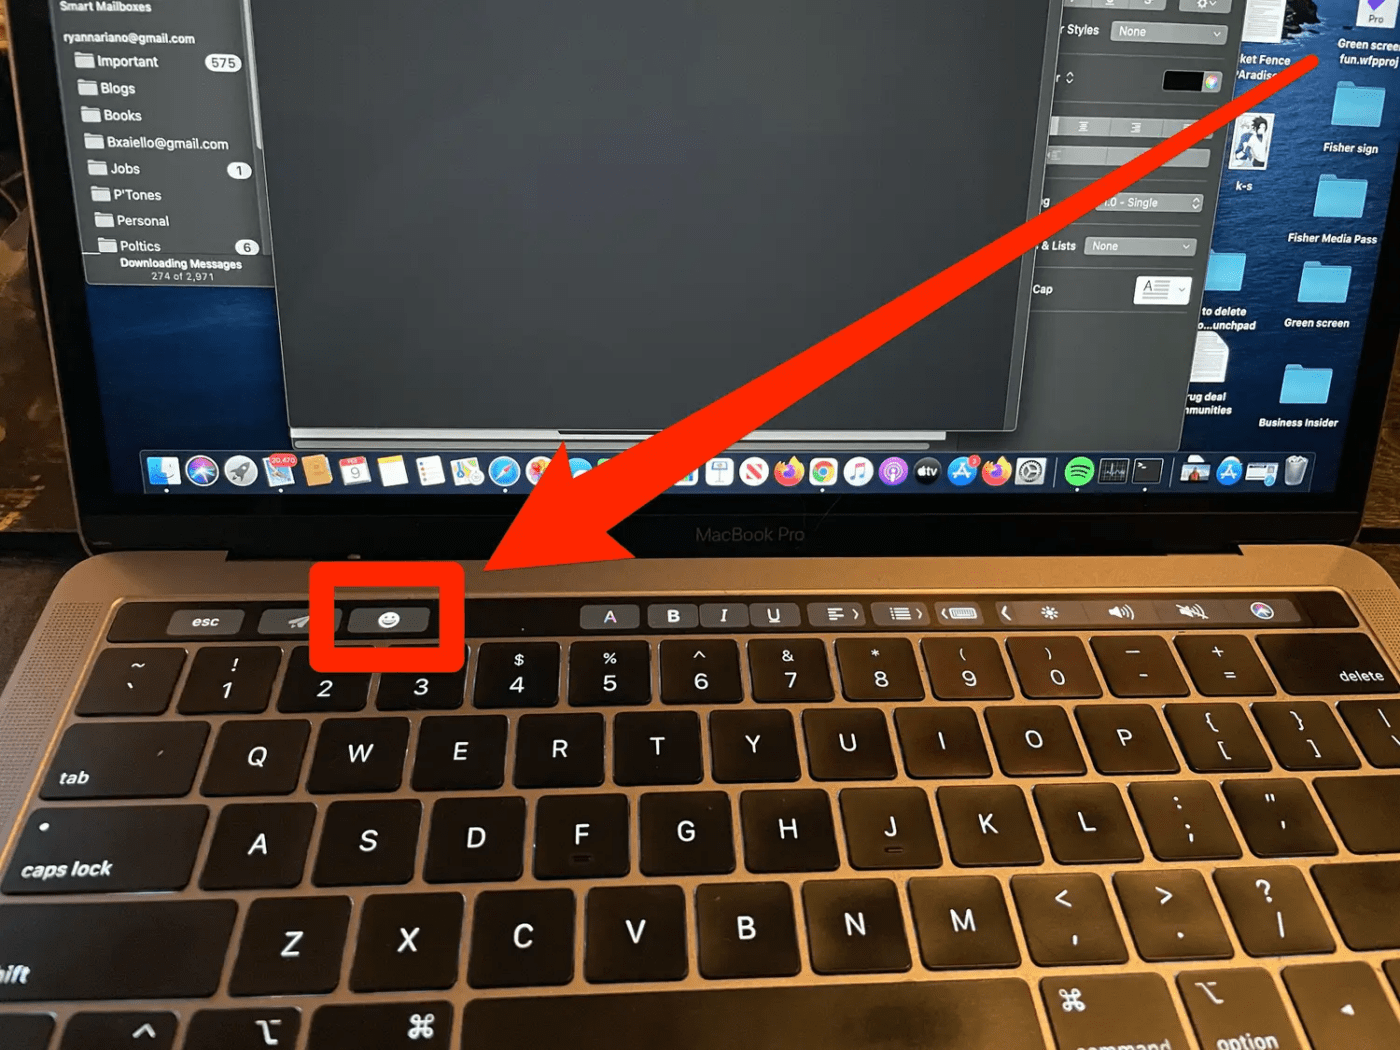 Find the emoji button on your Mac